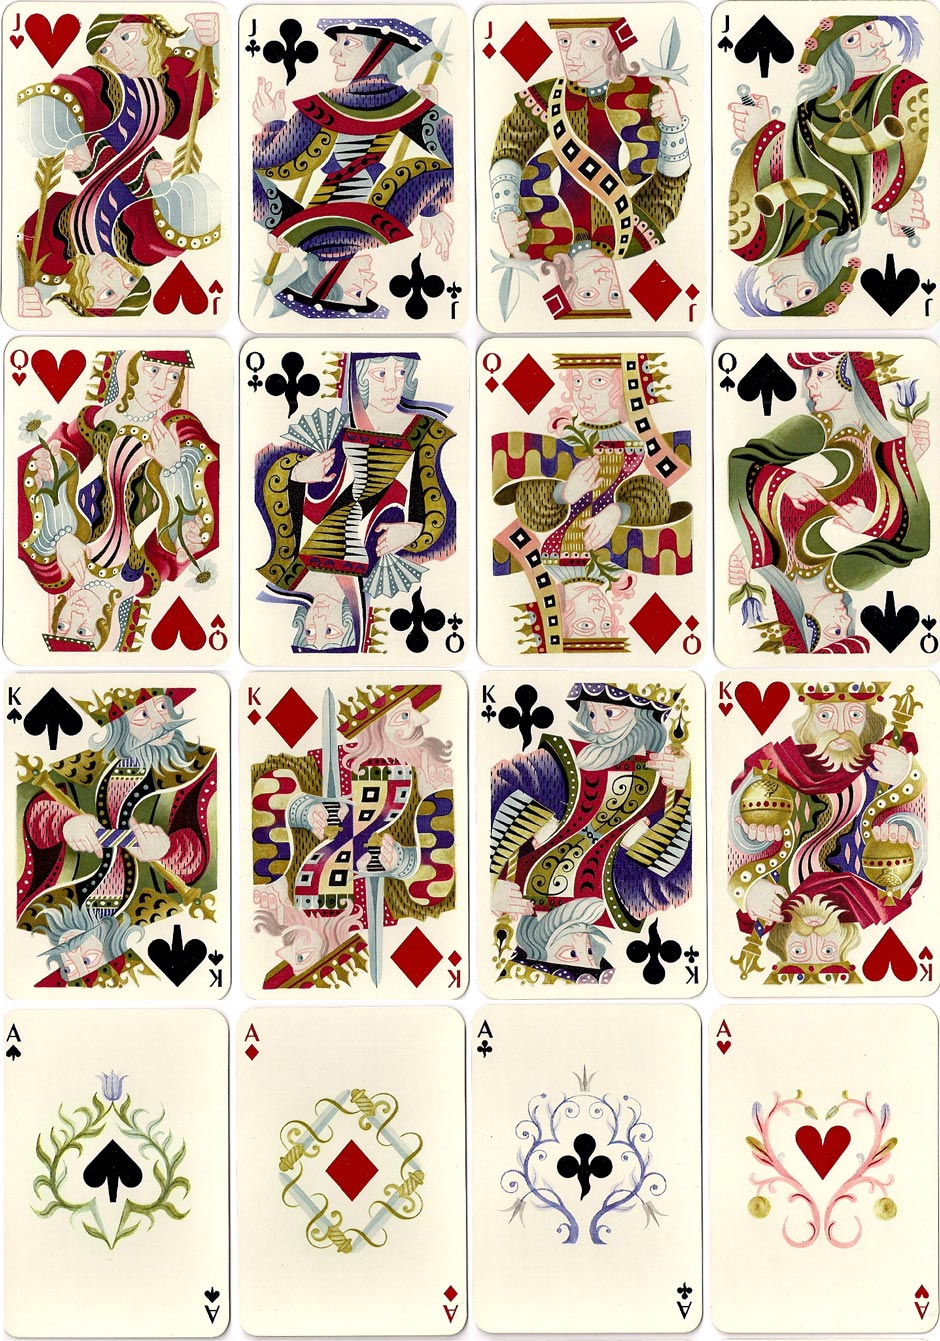 cards from the original 1948 edition of the set designed by Cassandre for Hermès-Paris